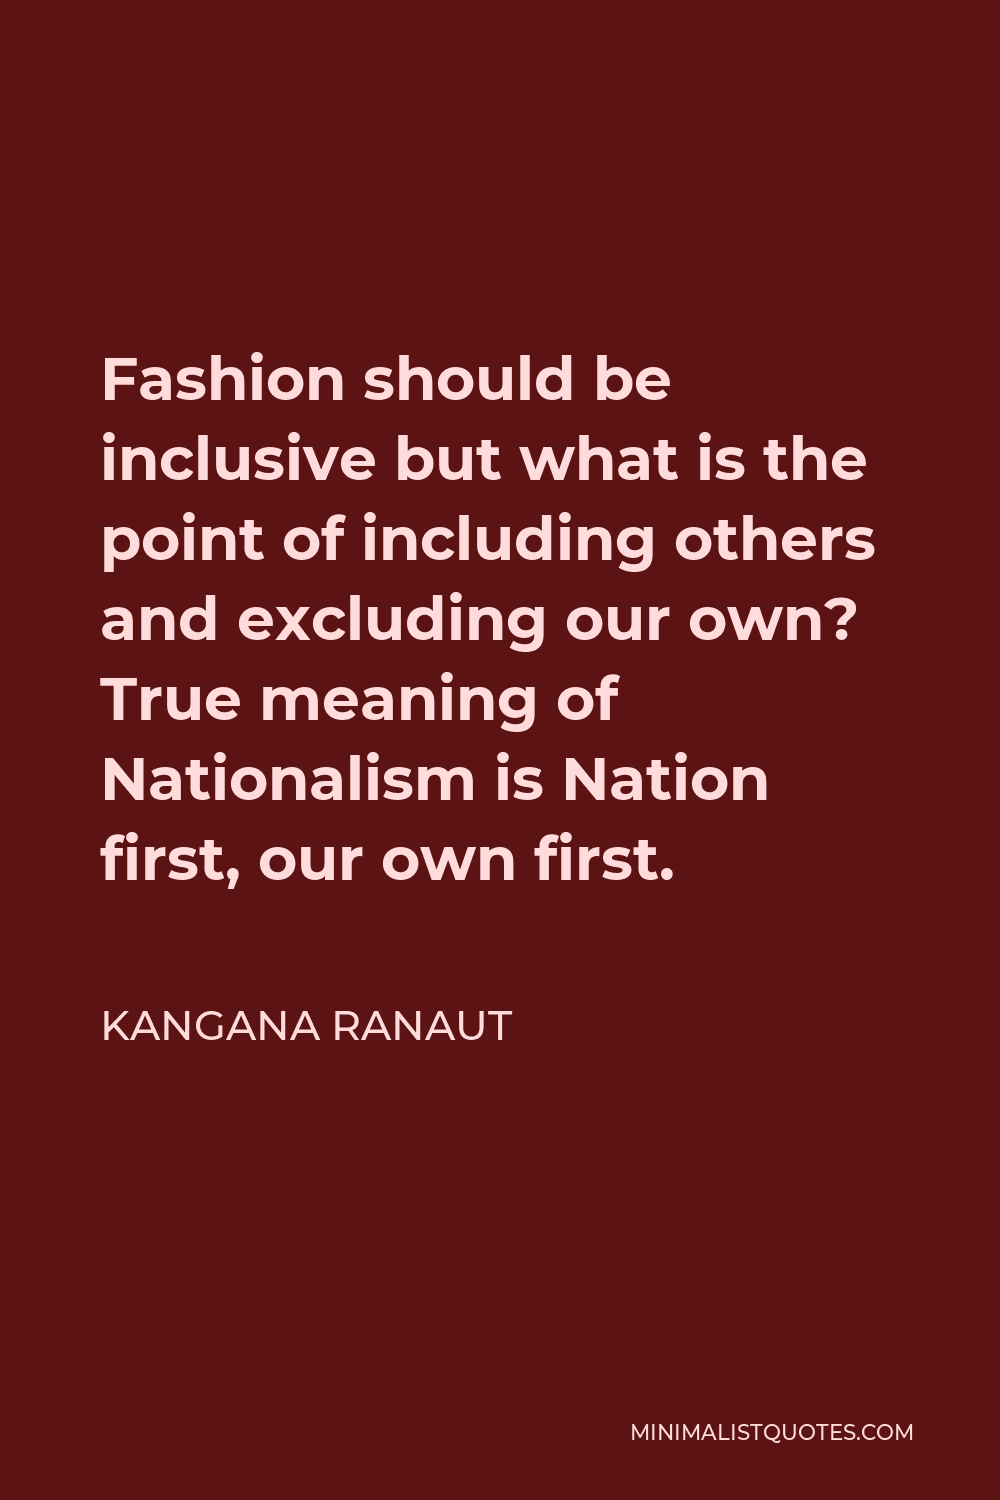 Kangana Ranaut Quote - Fashion should be inclusive but what is the point of including others and excluding our own? True meaning of Nationalism is Nation first, our own first.